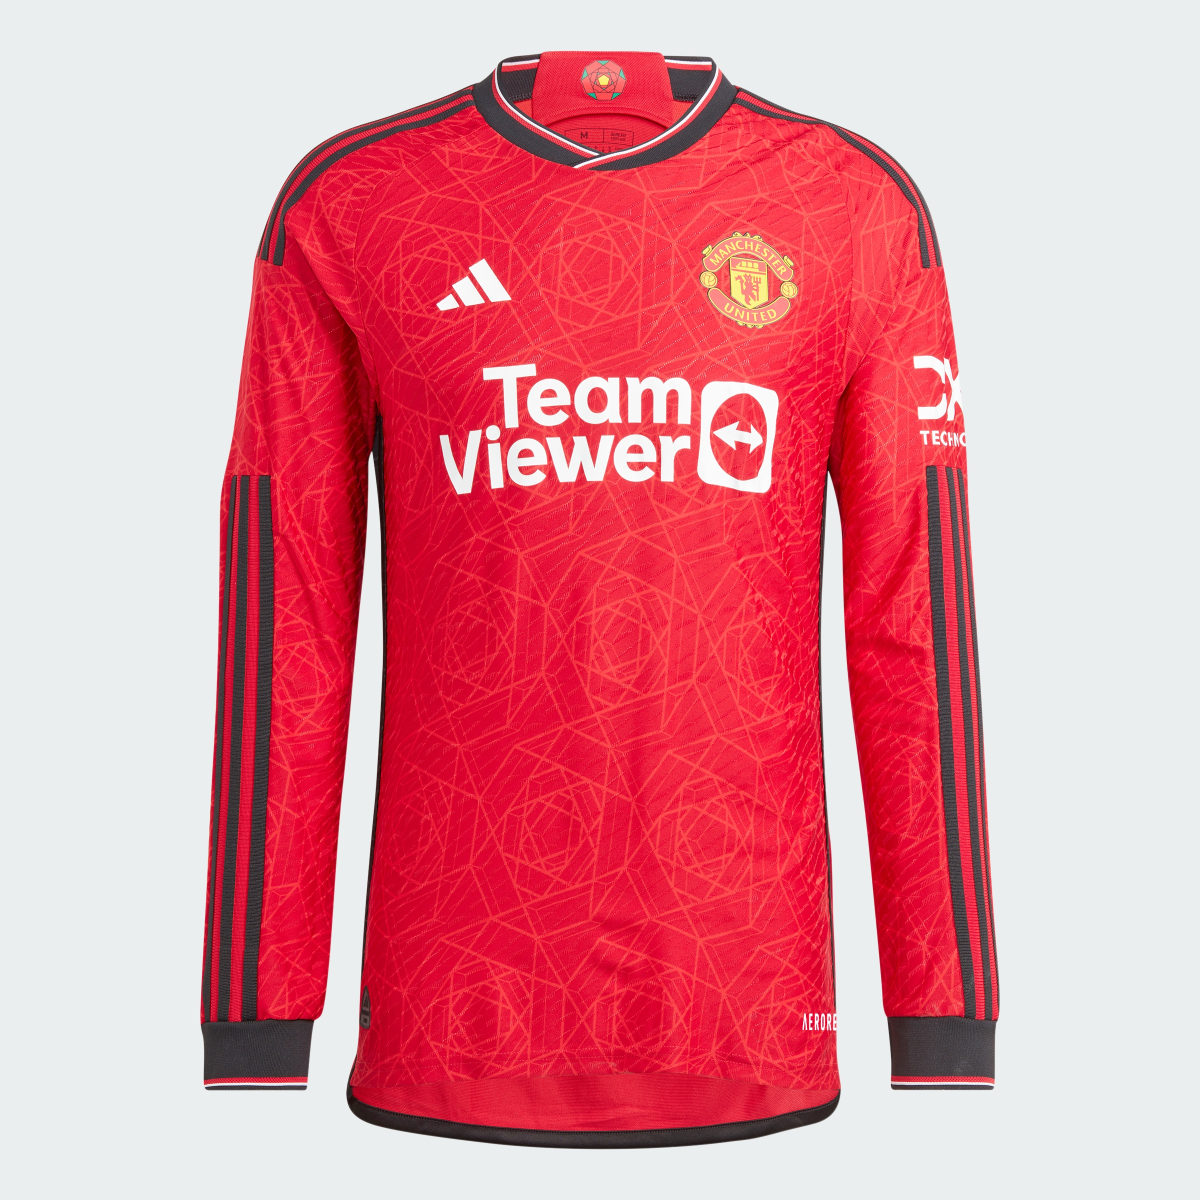 Adidas Maglia Home 23/24 Long Sleeve Manchester United FC. 5